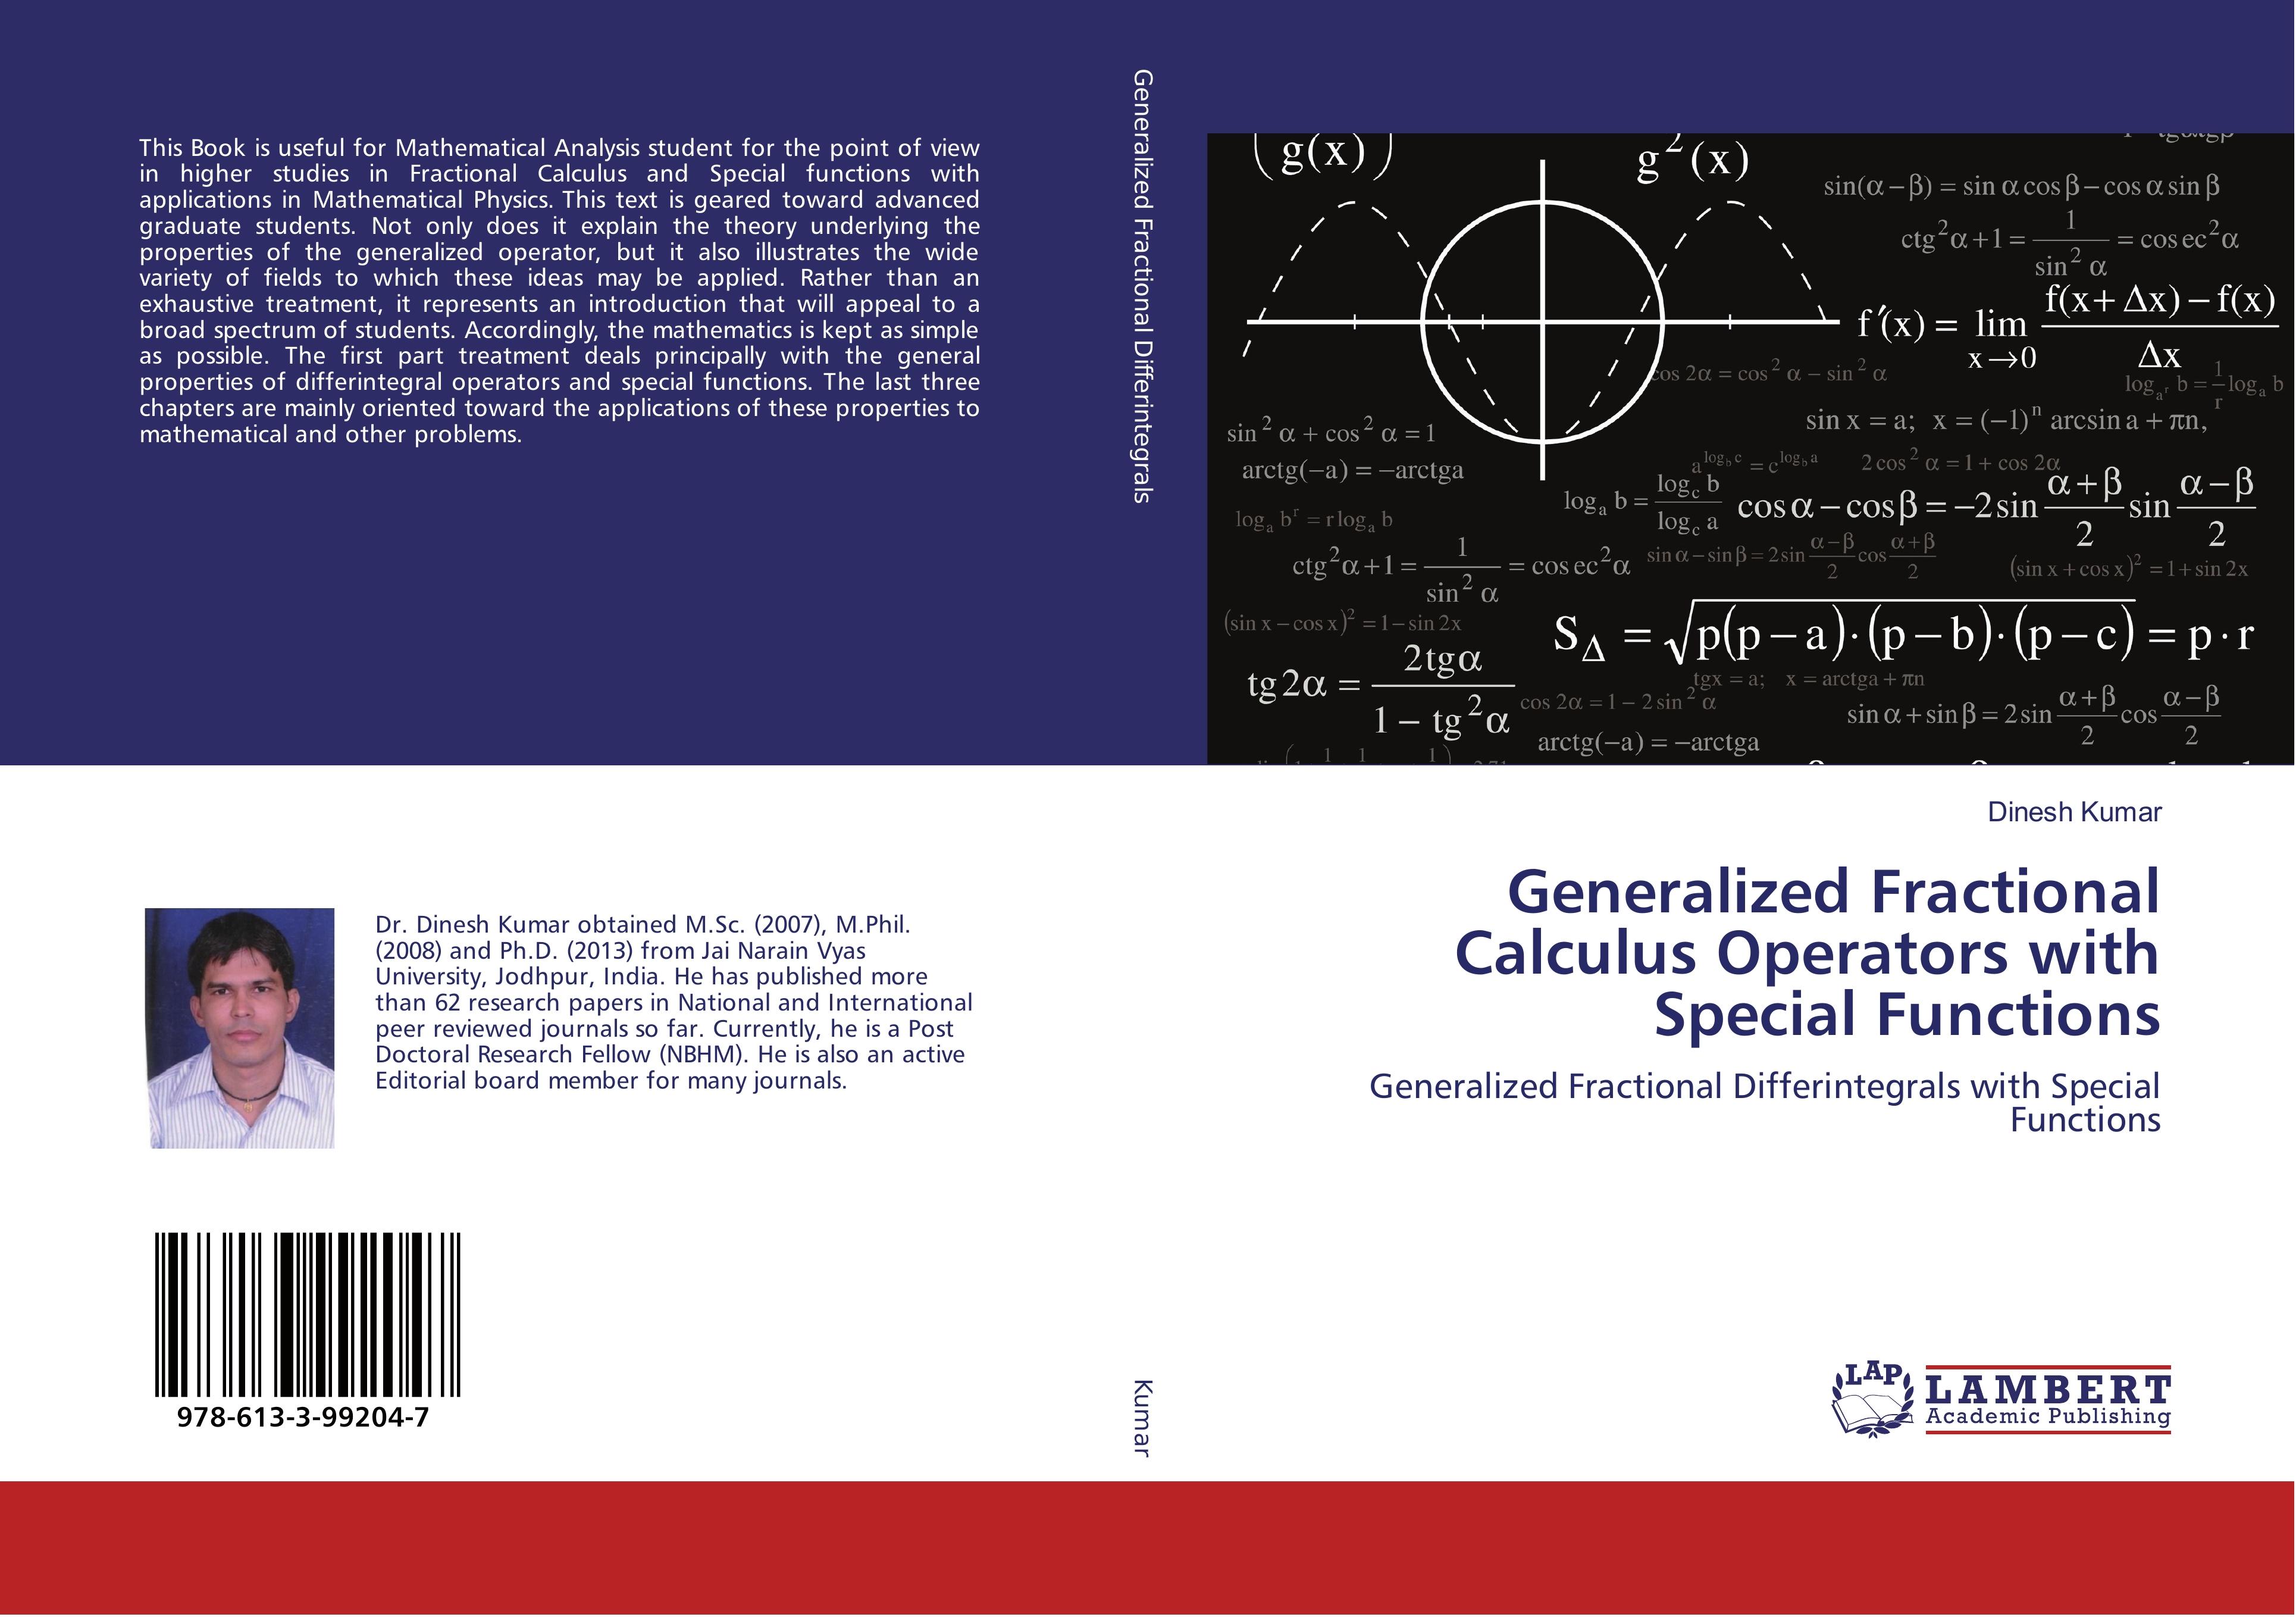 Generalized Fractional Calculus Operators with Special Functions - Dinesh Kumar